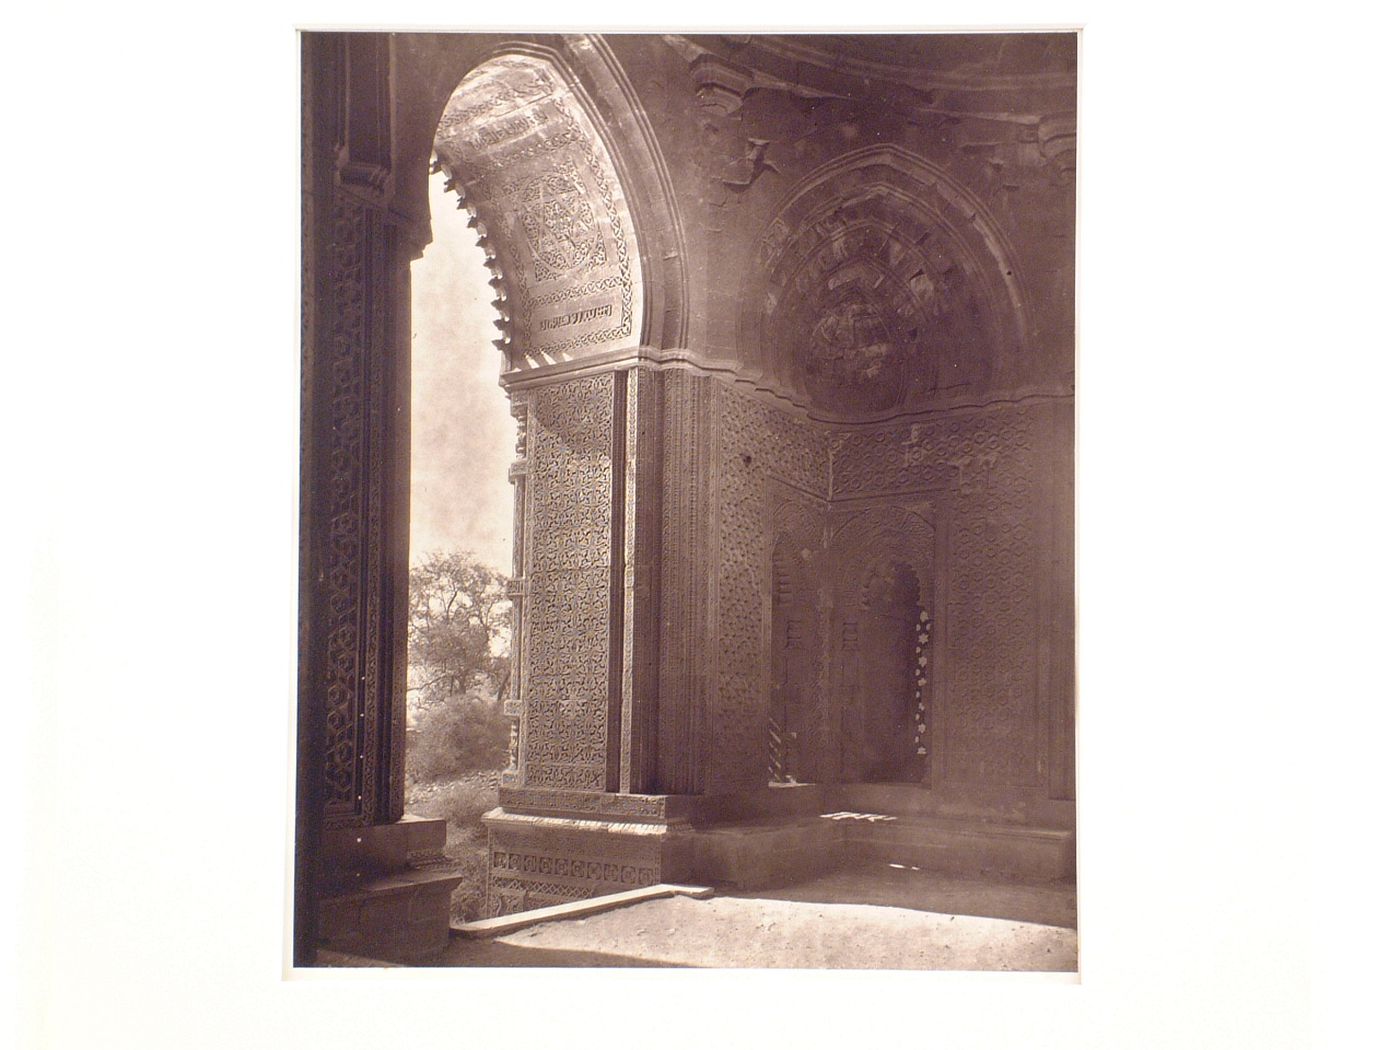 Interior view of the 'Ala'i Darvaza [Lofty Gate] showing the southern entrance, Quwwat al-Islam [Might of Islam] Mosque Complex, Delhi, India